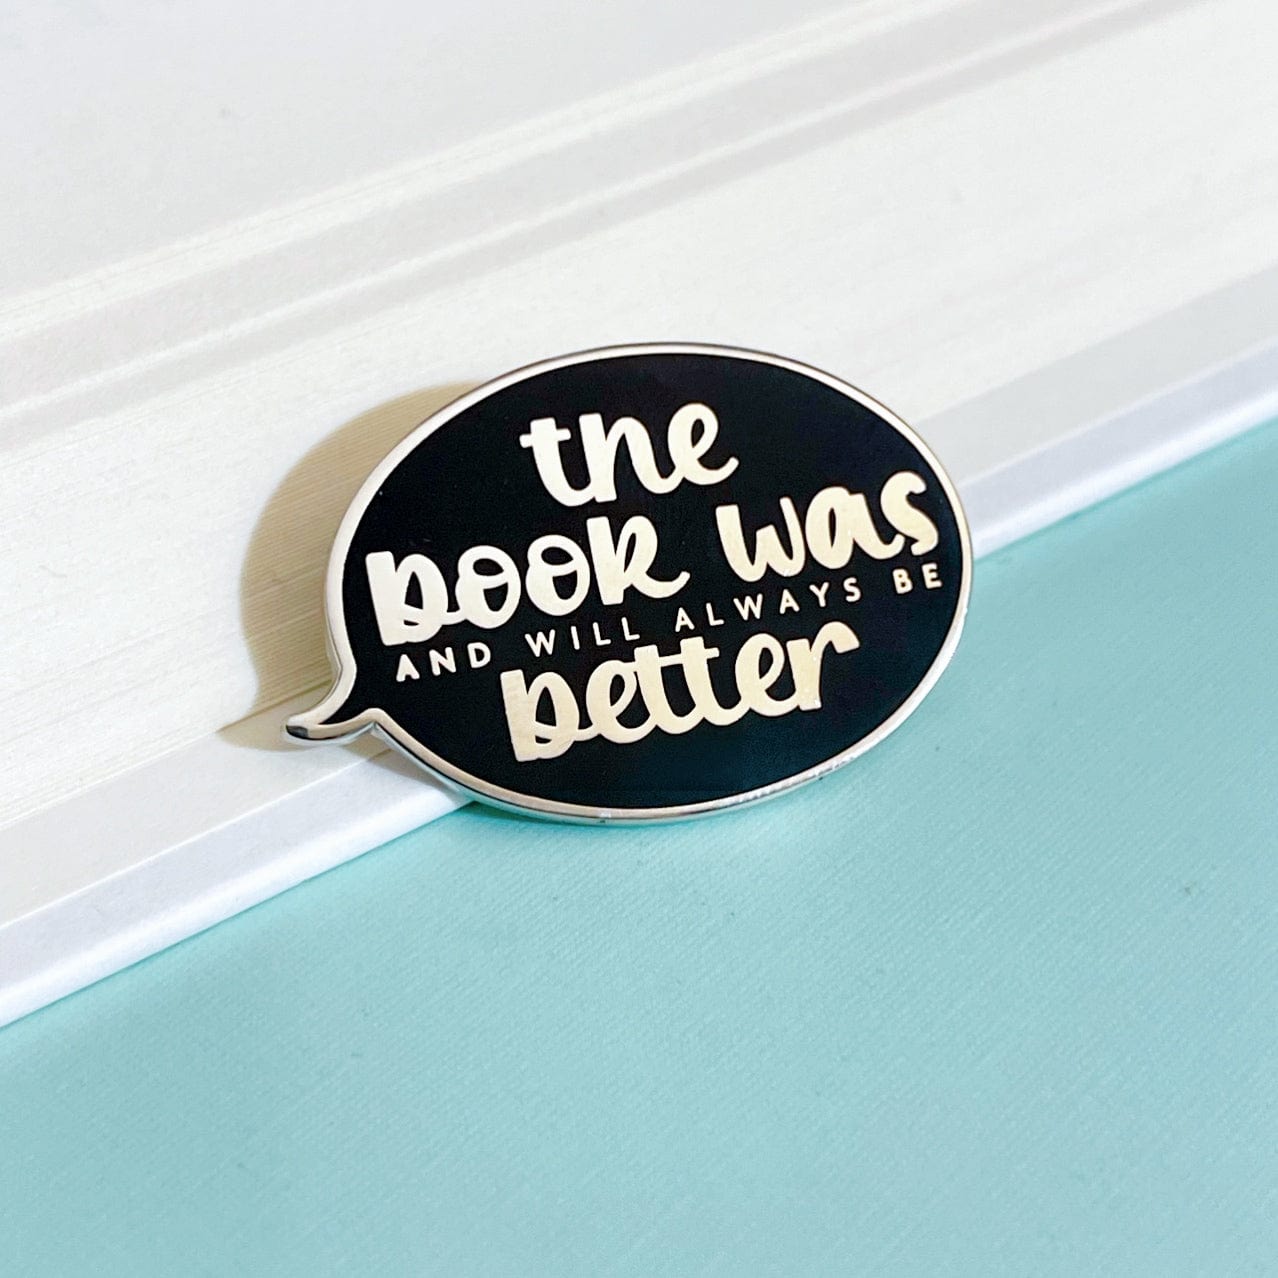 The Book Was Better Enamel Pin